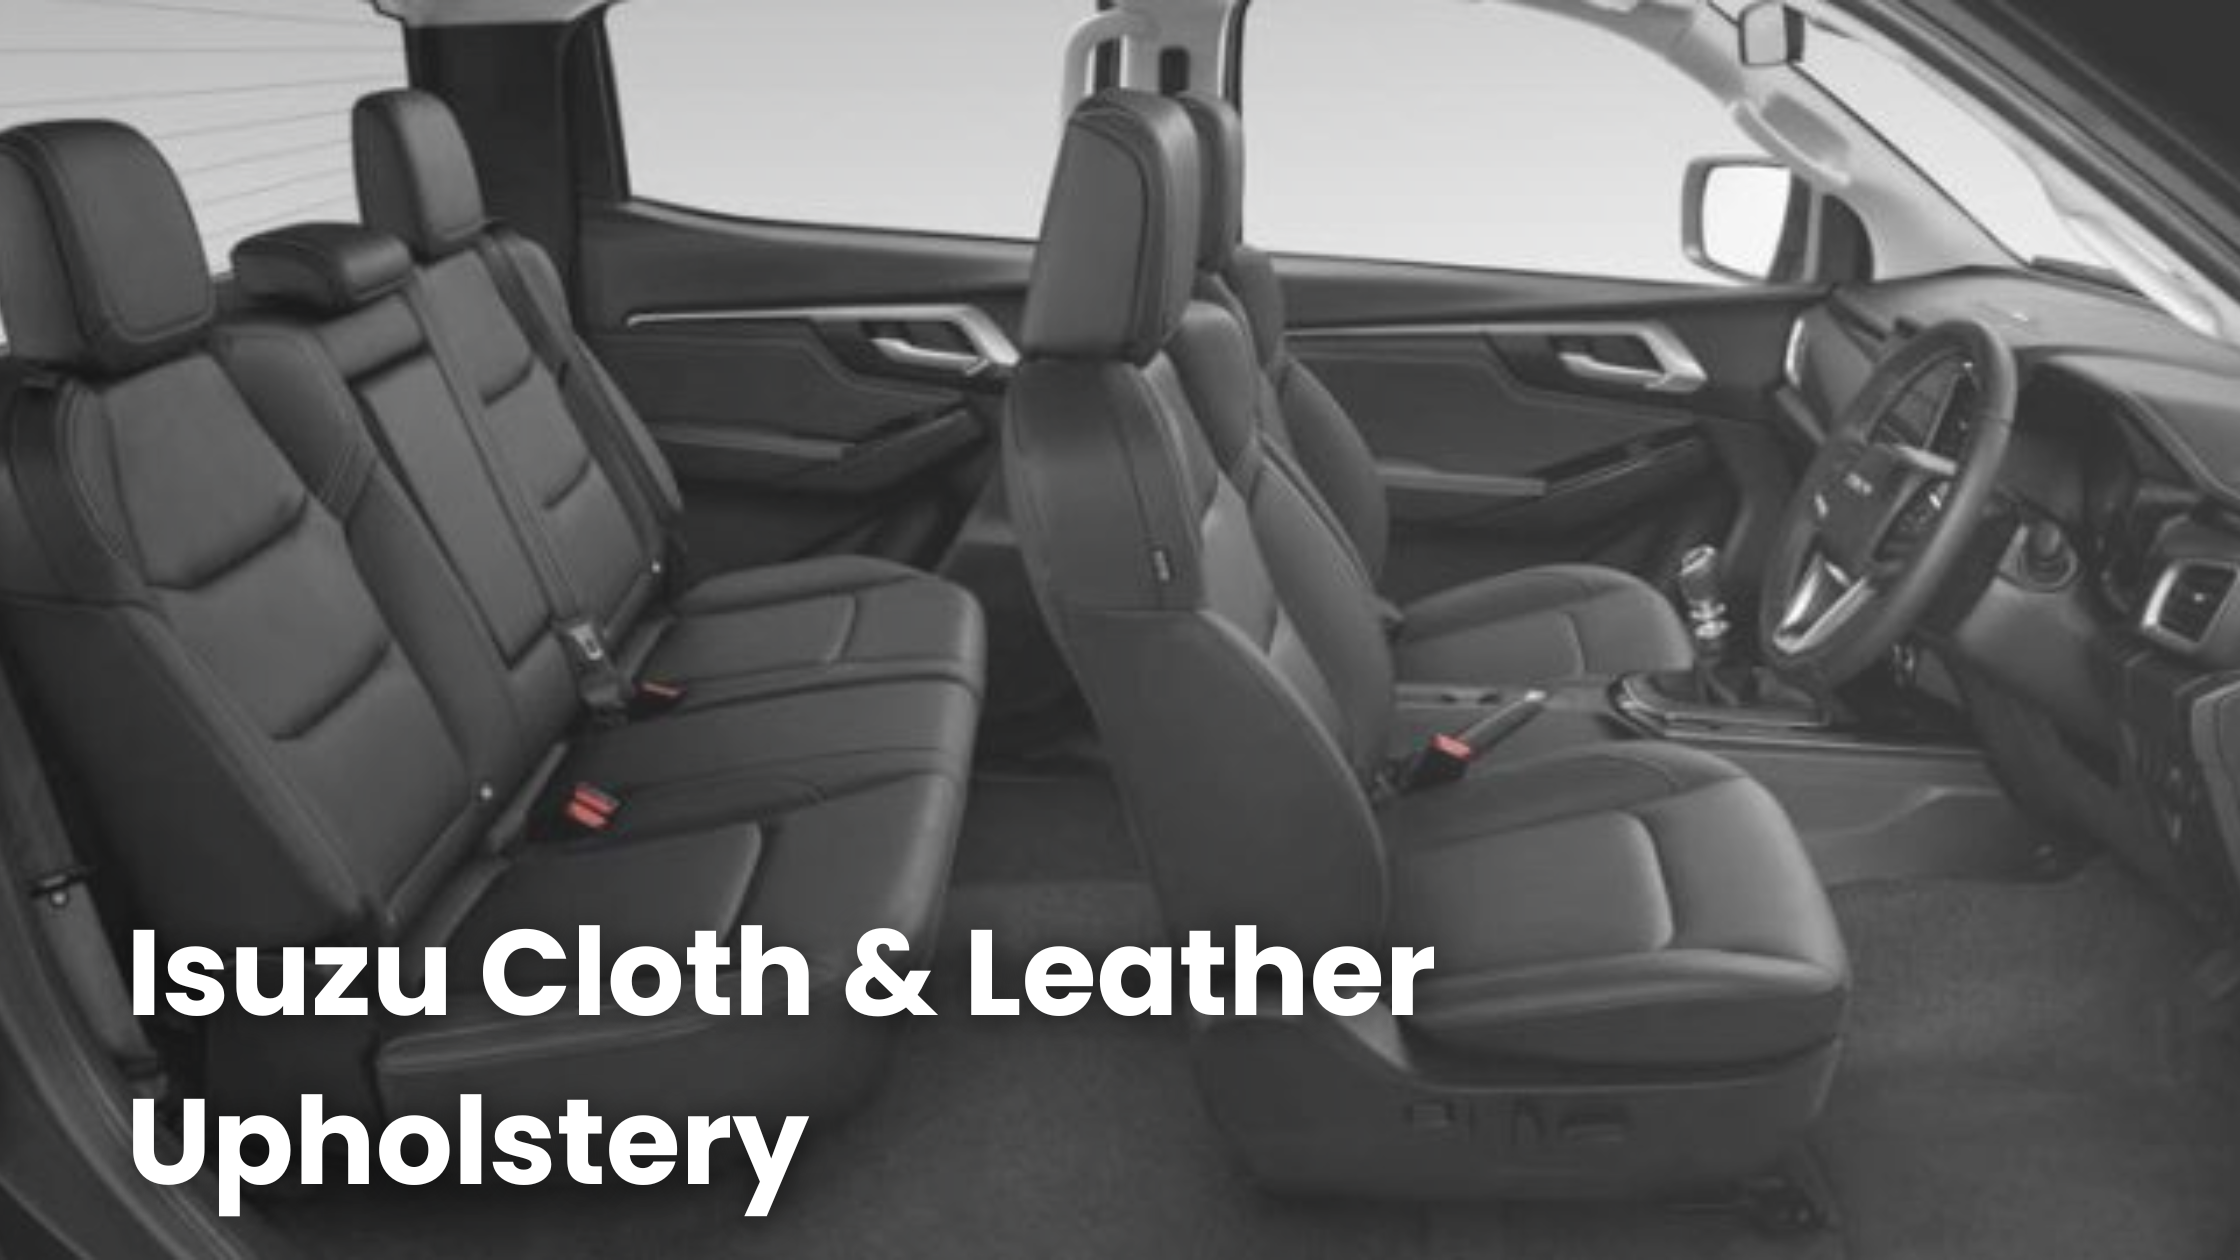 D-Max - Cloth vs Leather Upholstery Options